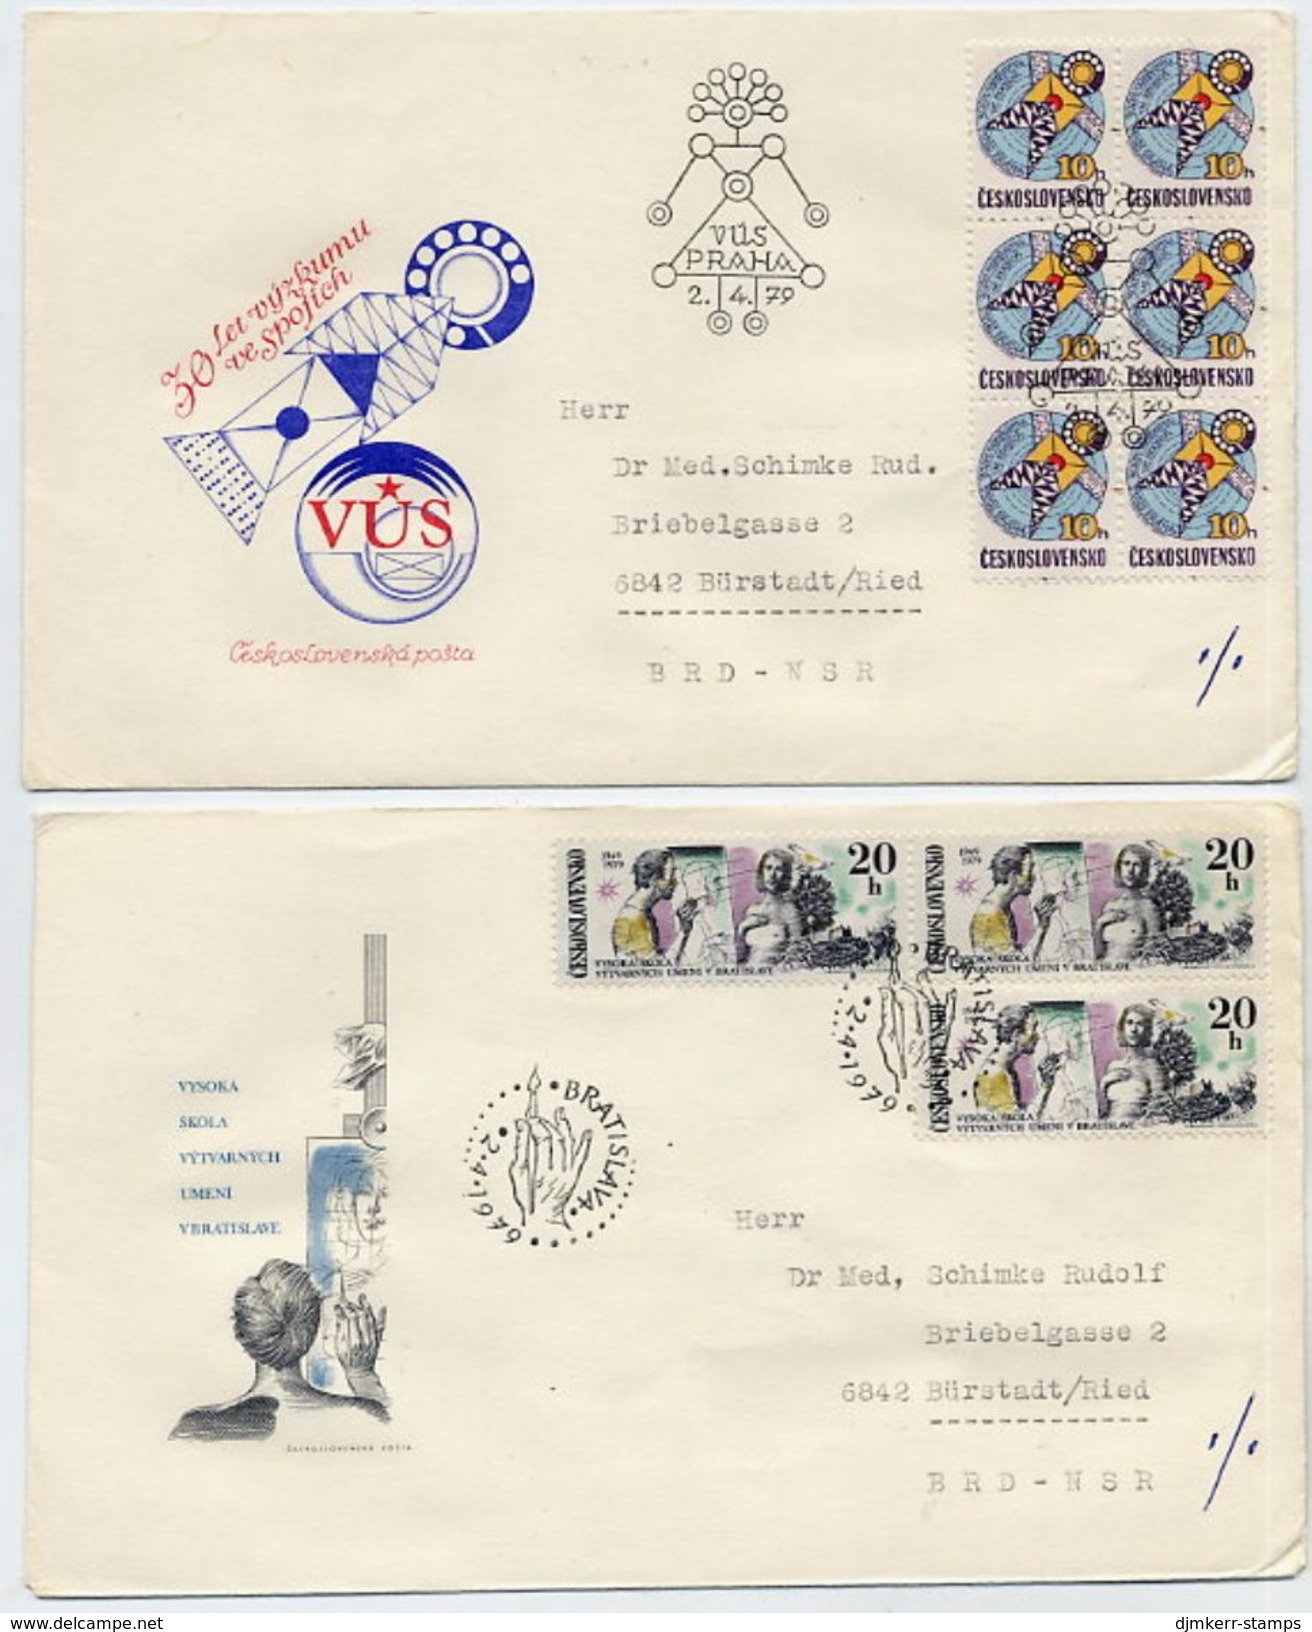 CZECHOSLOVAKIA 1979 Anniversaries Issue On Six FDC's.  Michel 2499-504 - FDC